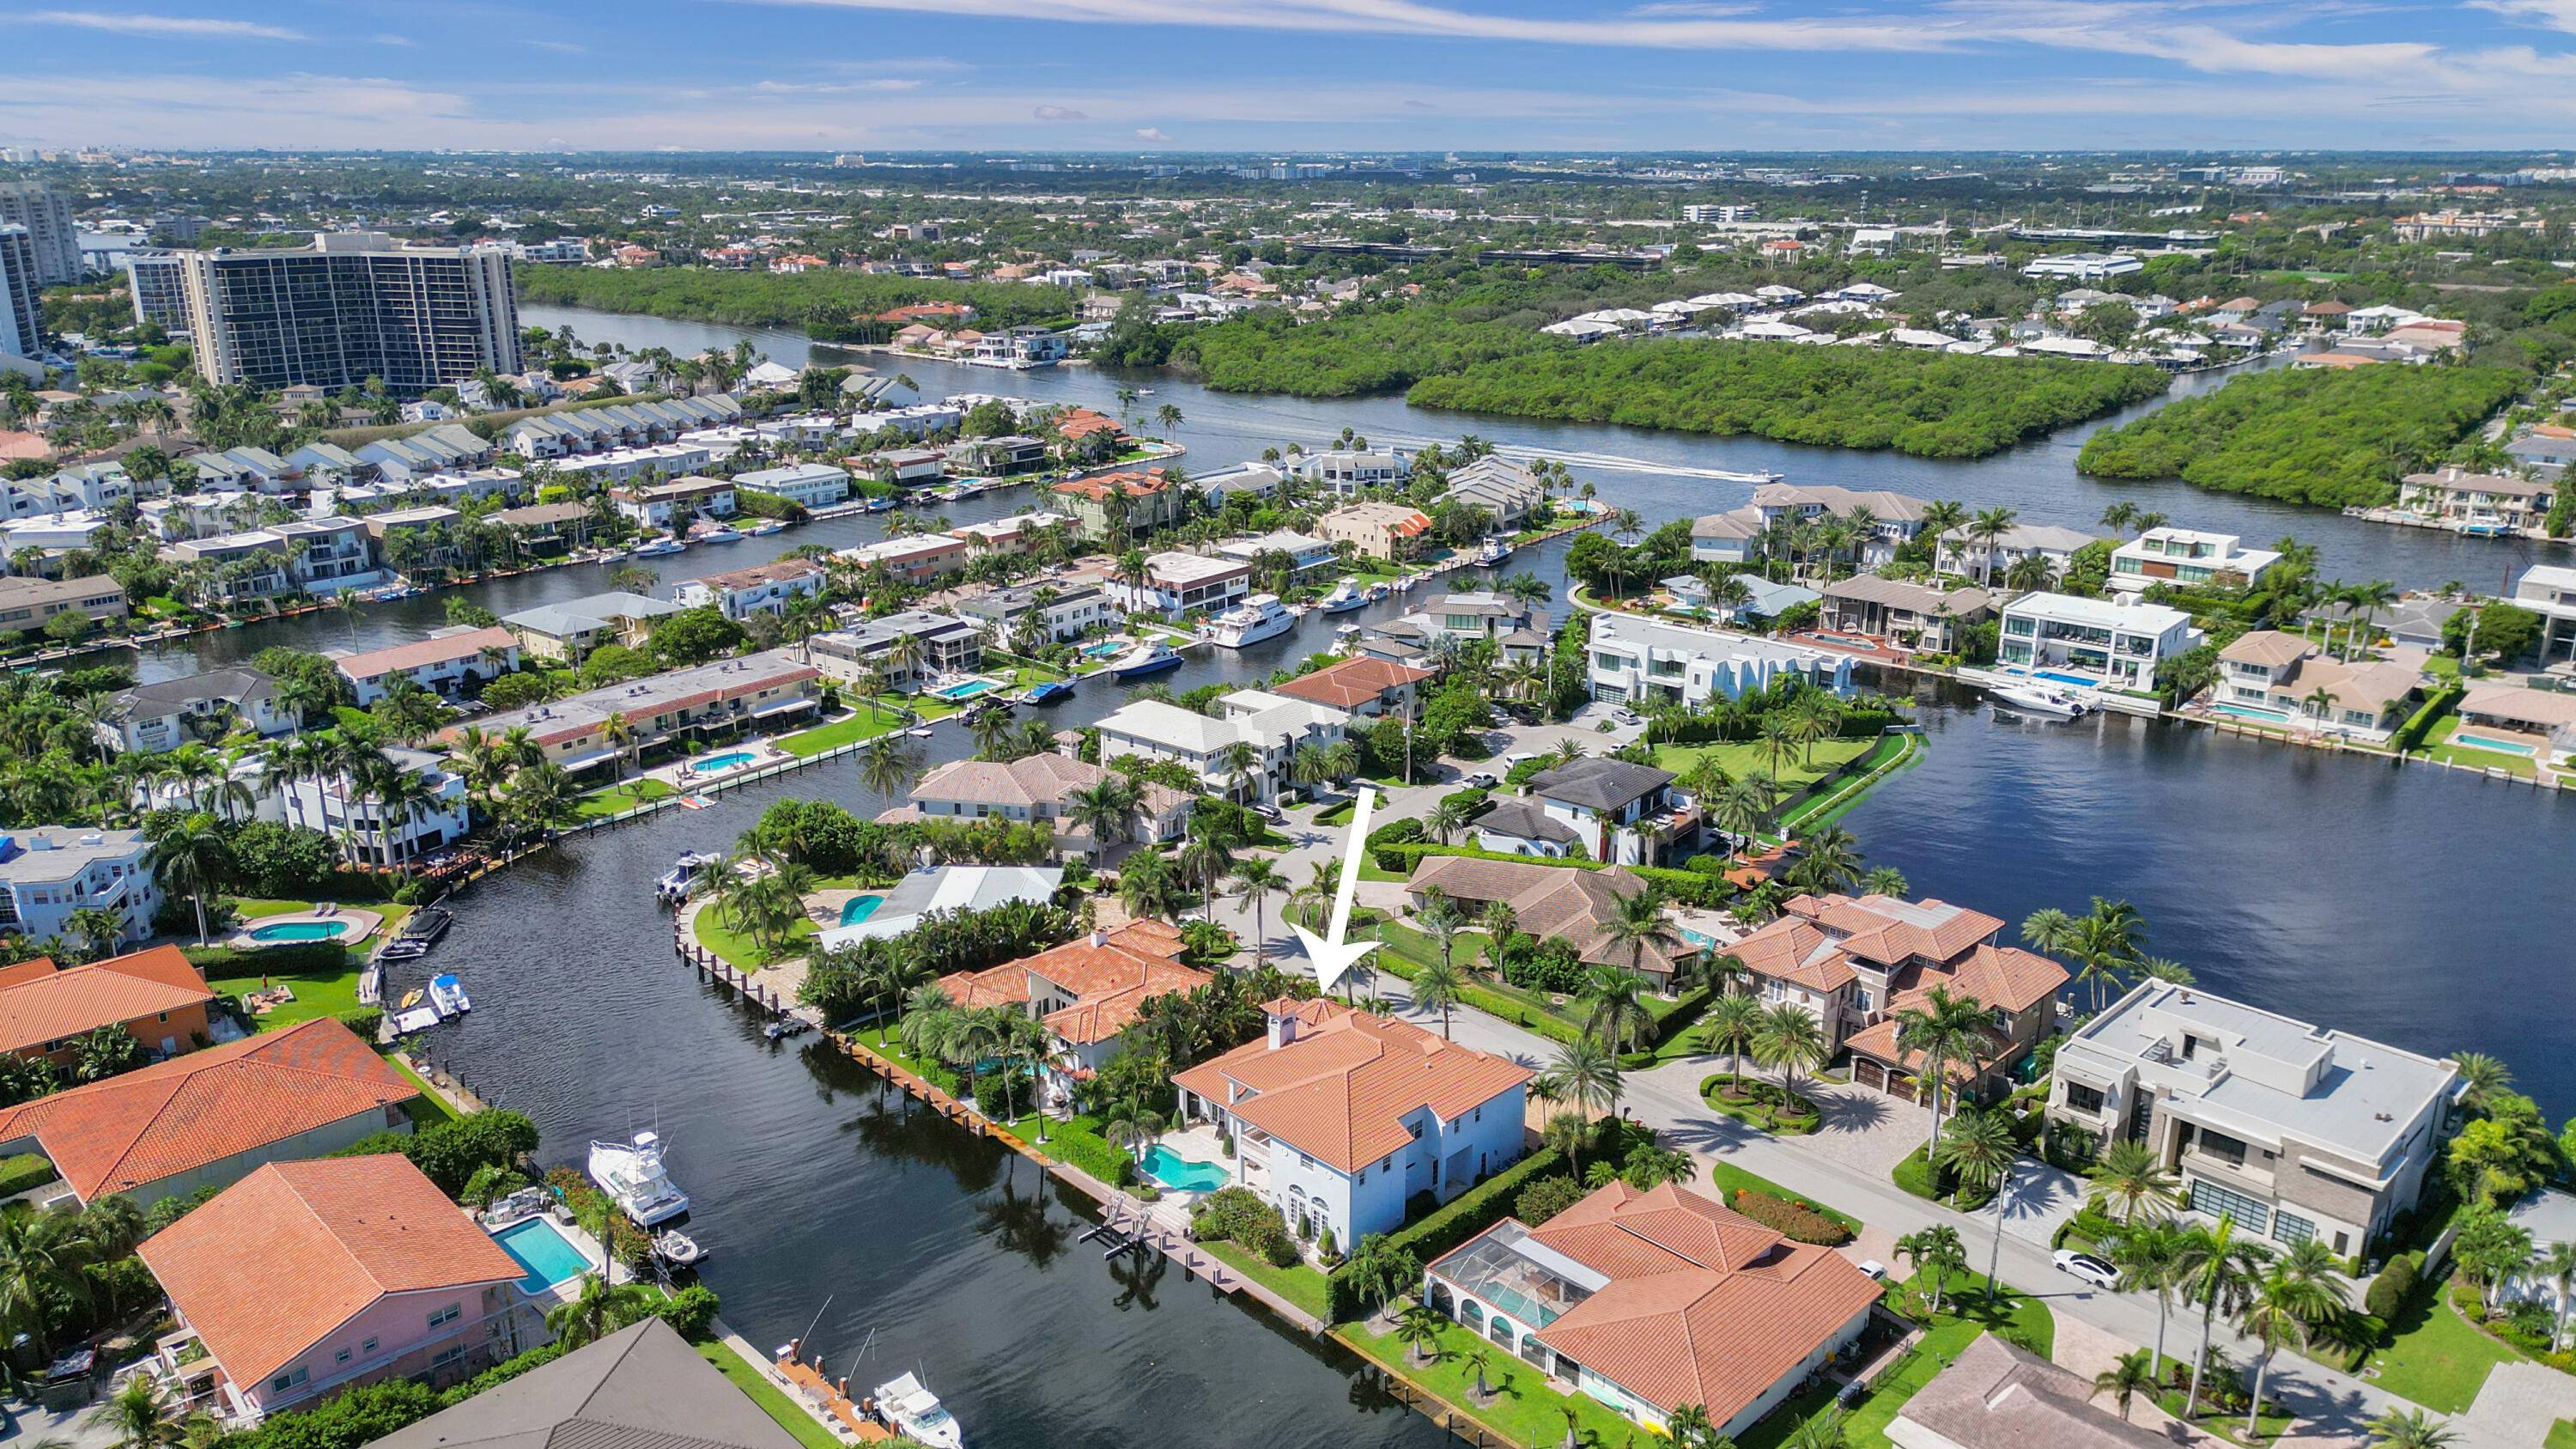 Welcome to your waterfront oasis in the desirable Bel Lido neighborhood of Highland Beach Florida.